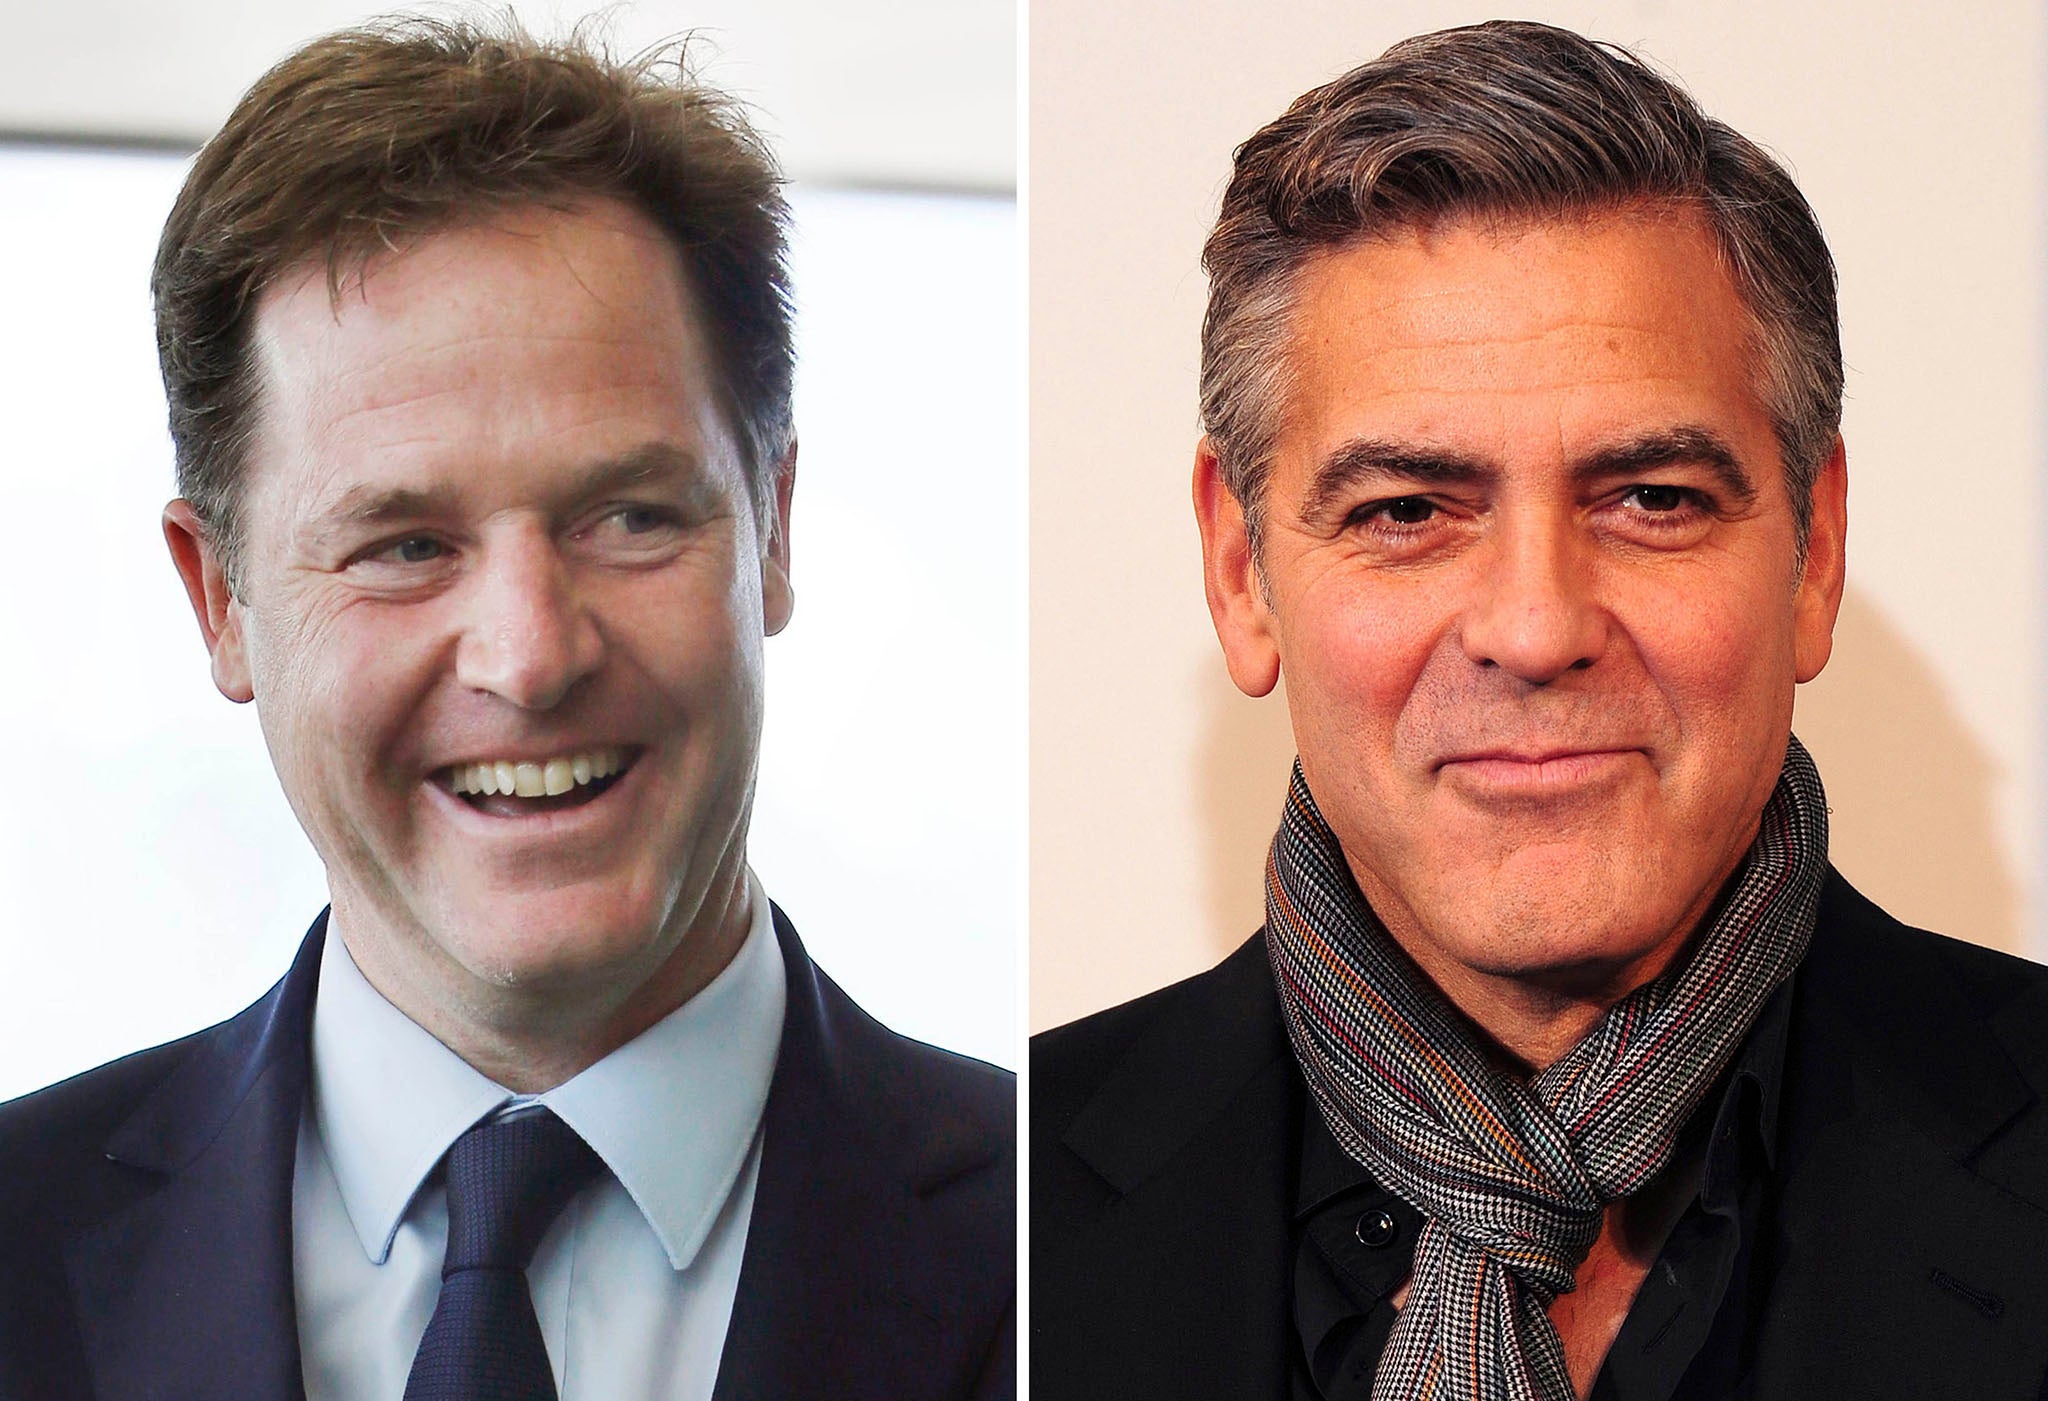 Separated at birth? Nick Clegg and George Clooney